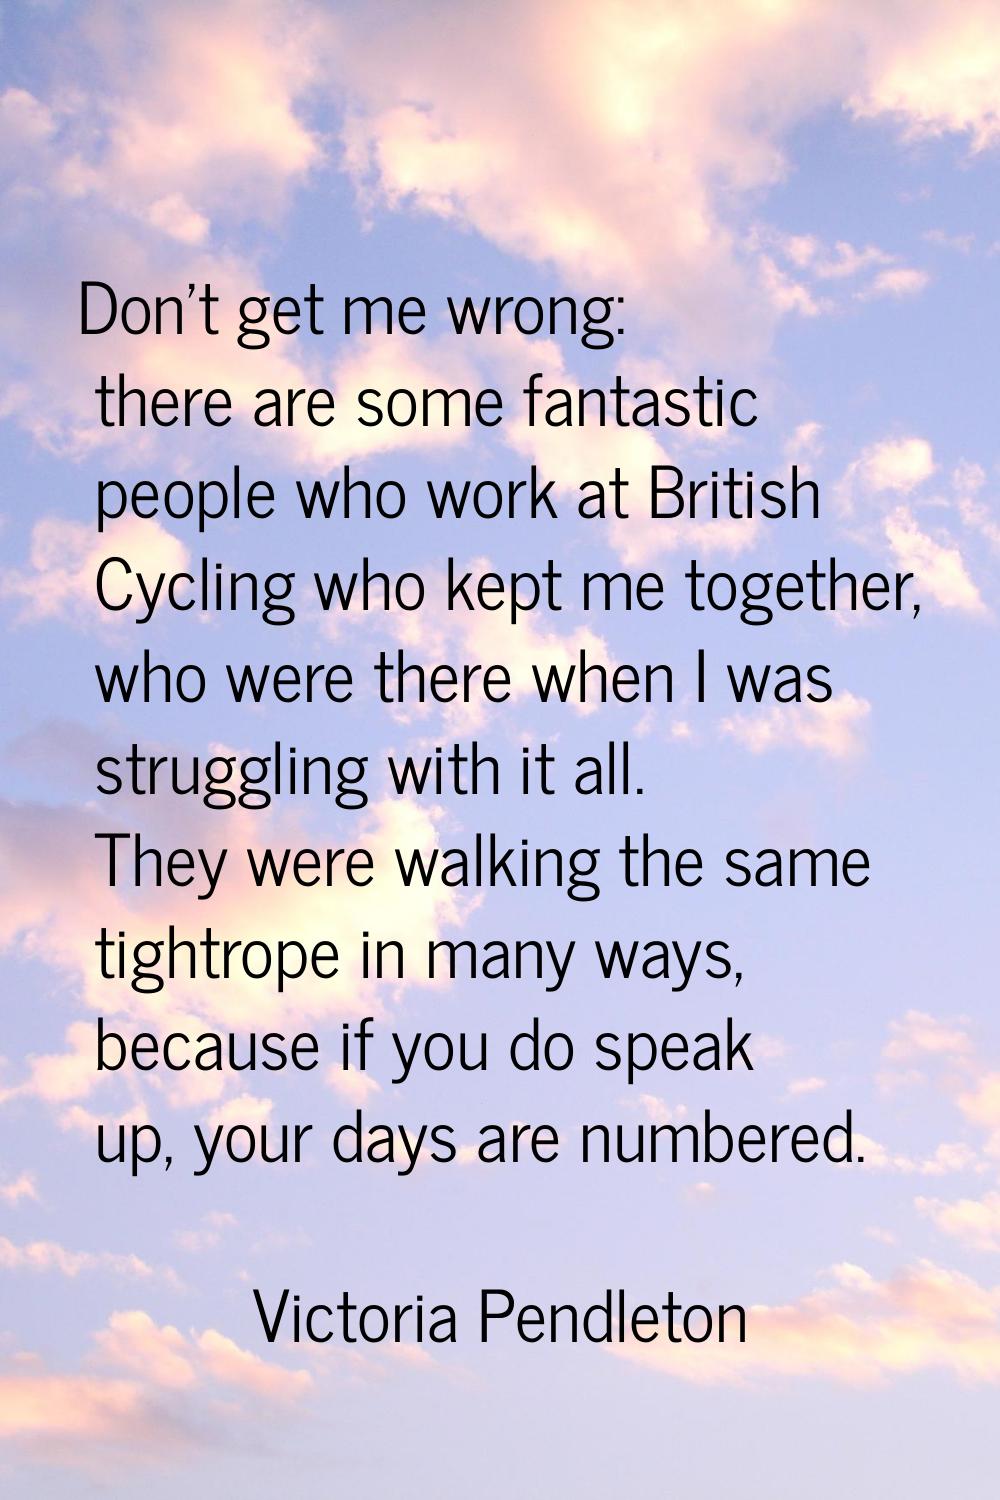 Don't get me wrong: there are some fantastic people who work at British Cycling who kept me togethe